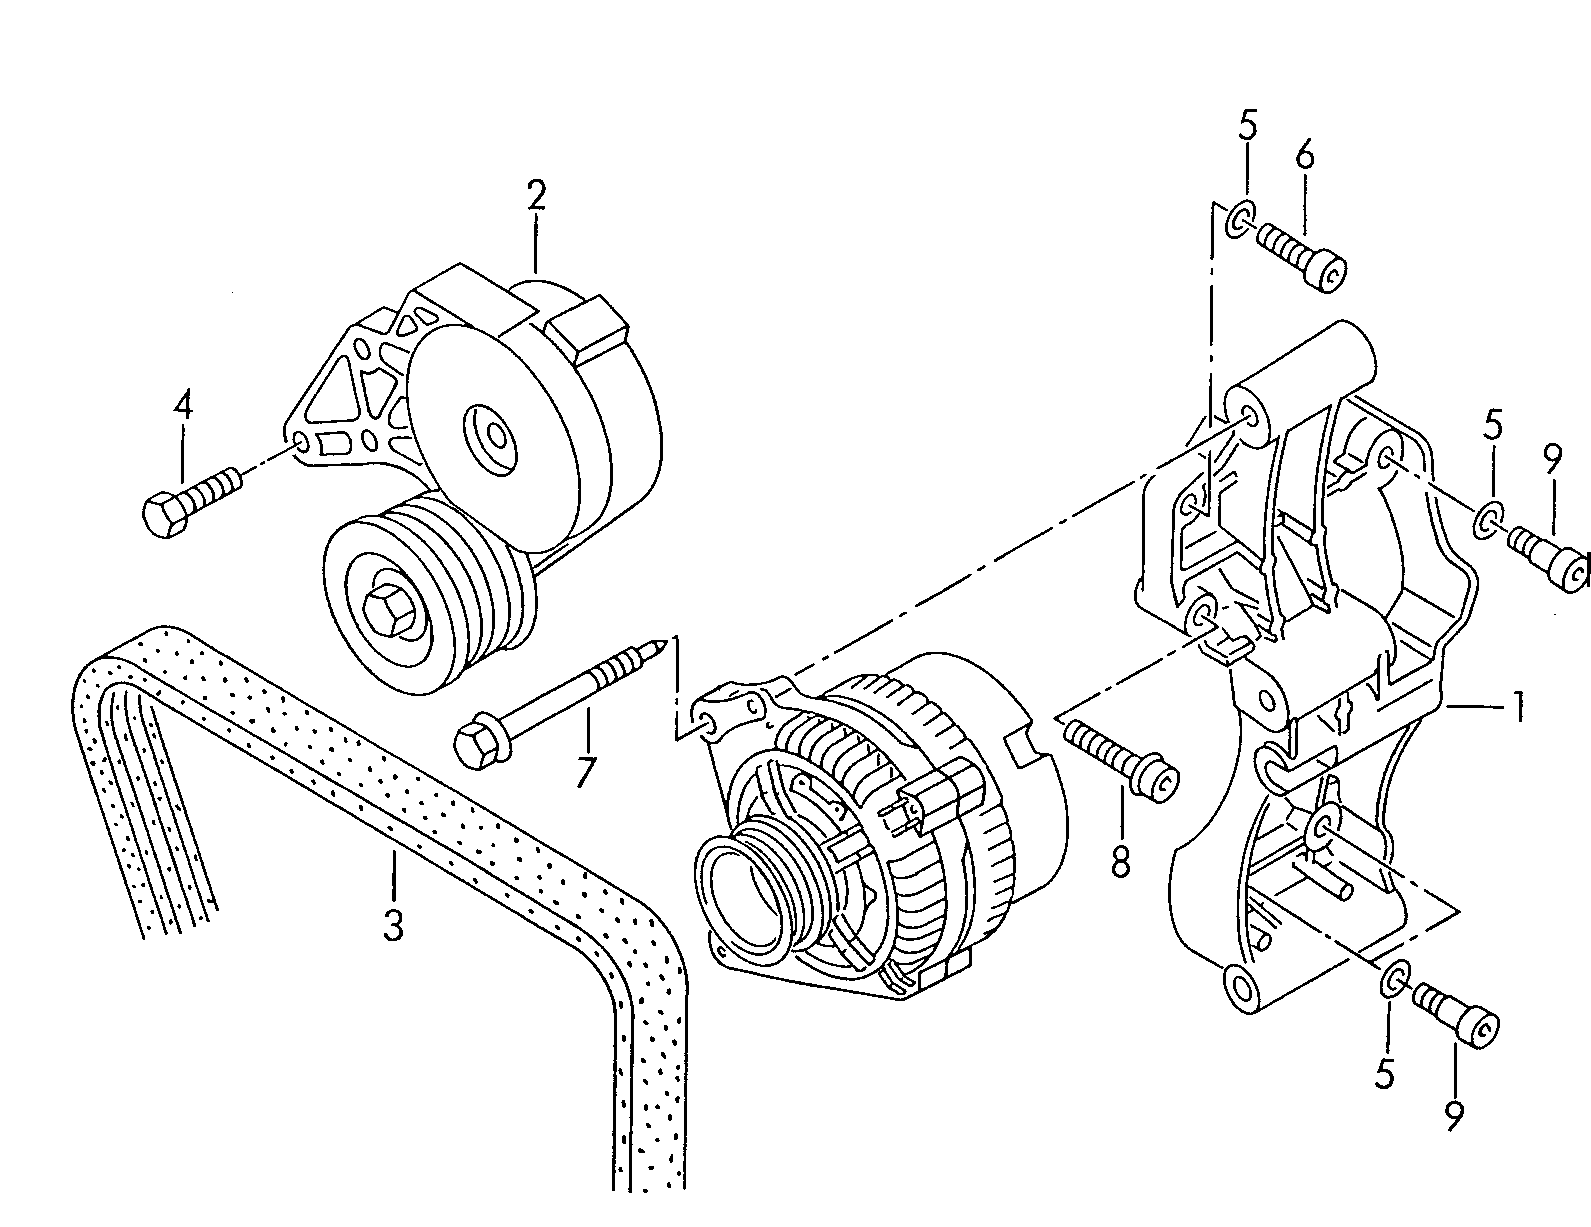 connecting and mounting parts
for alternator; pol... - Sharan/syncro/4Motion(SHA)  